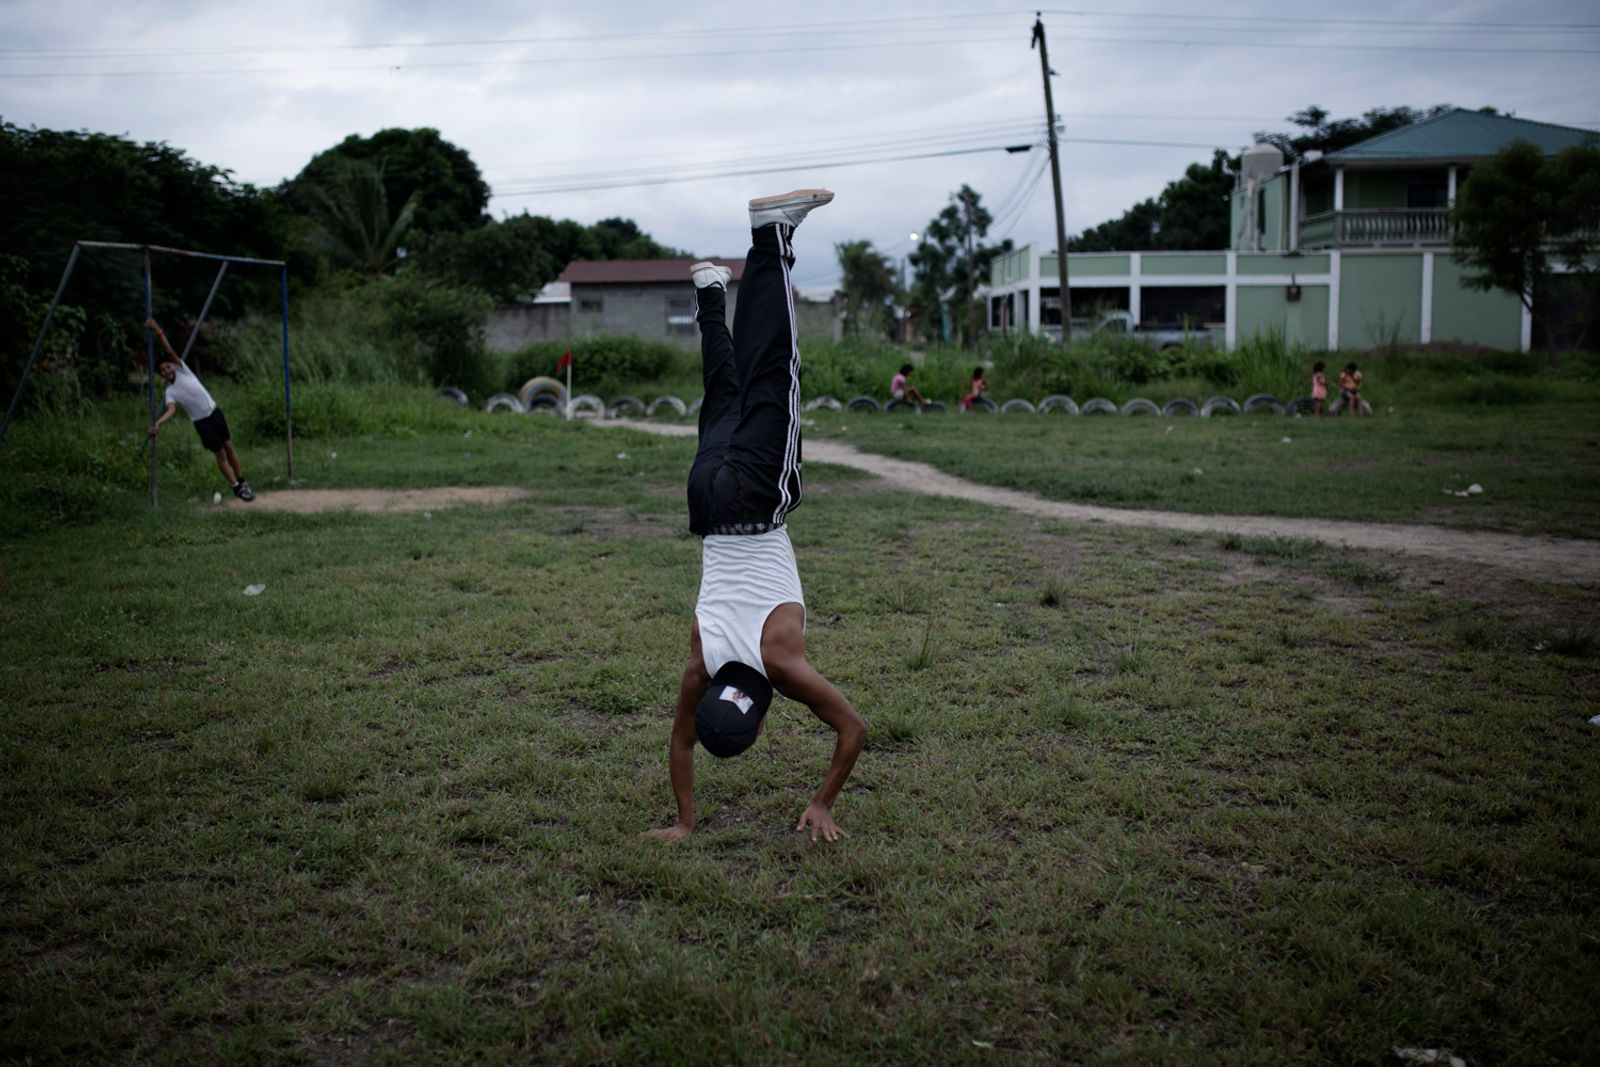 A Dark Tale of Violence in Central America’s Northern Triangle